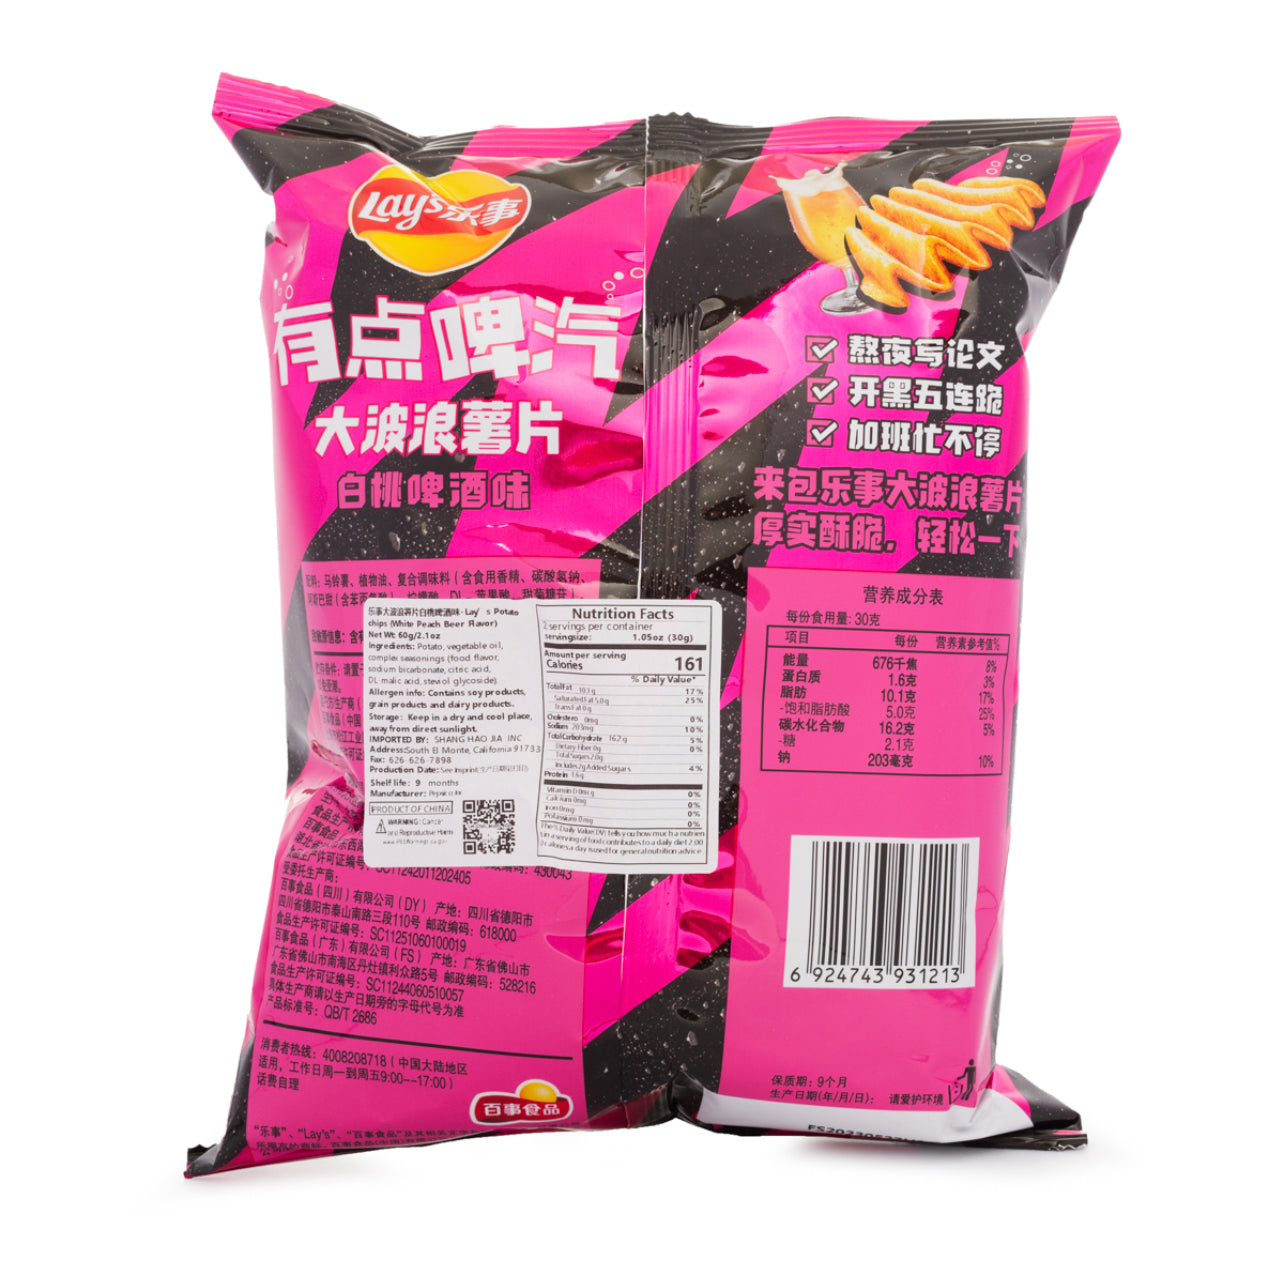 Exotic chip Lays Peach Beer flavor